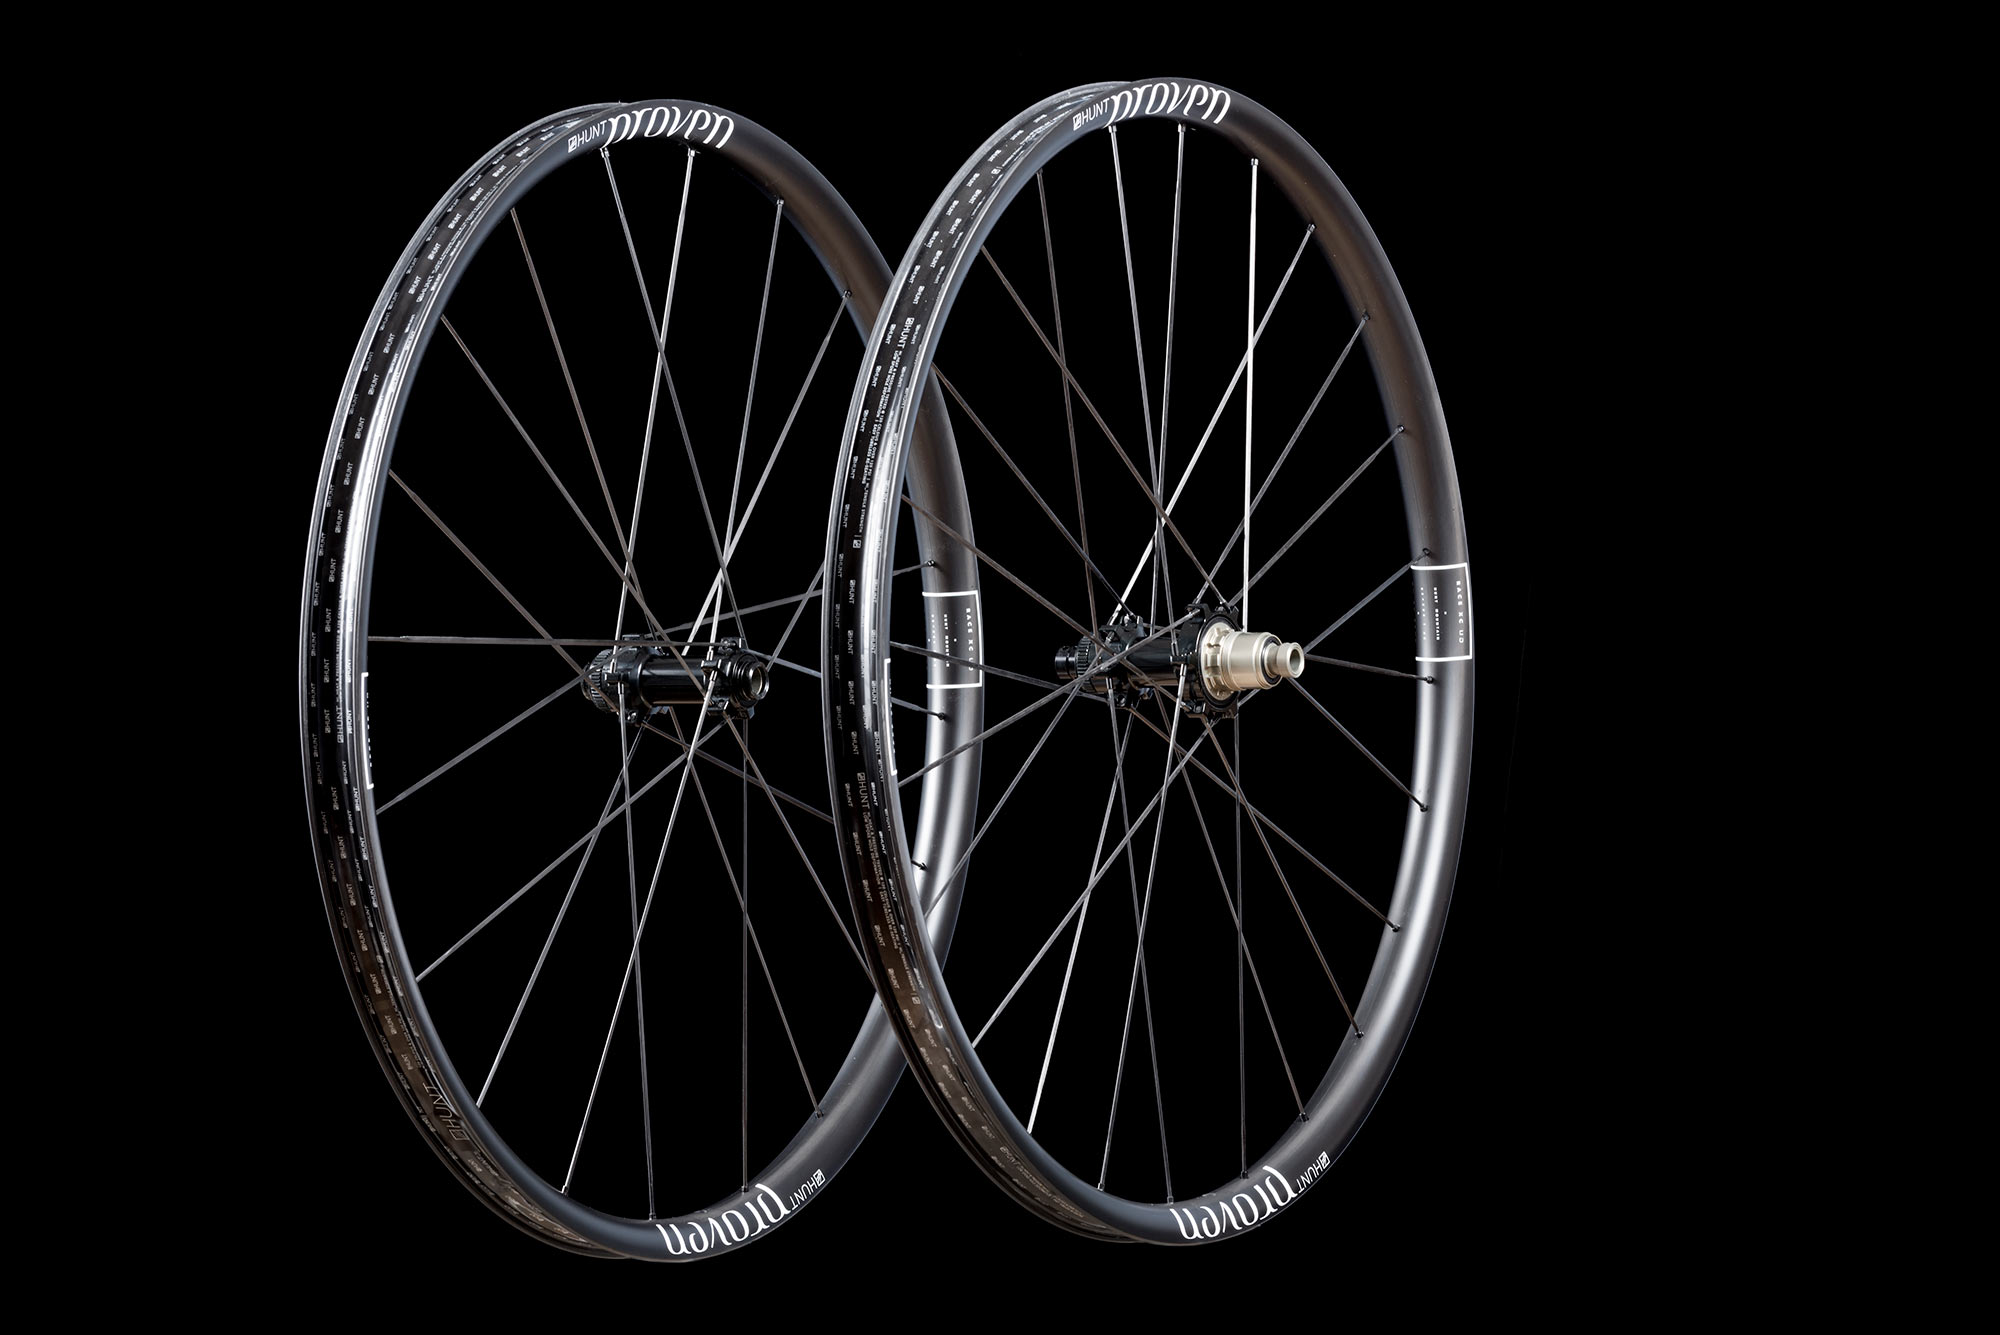 Hunt Proven Carbon Race XC UD MTB Wheels are Just 1254g (Plus New Alloy Hoops, too!)